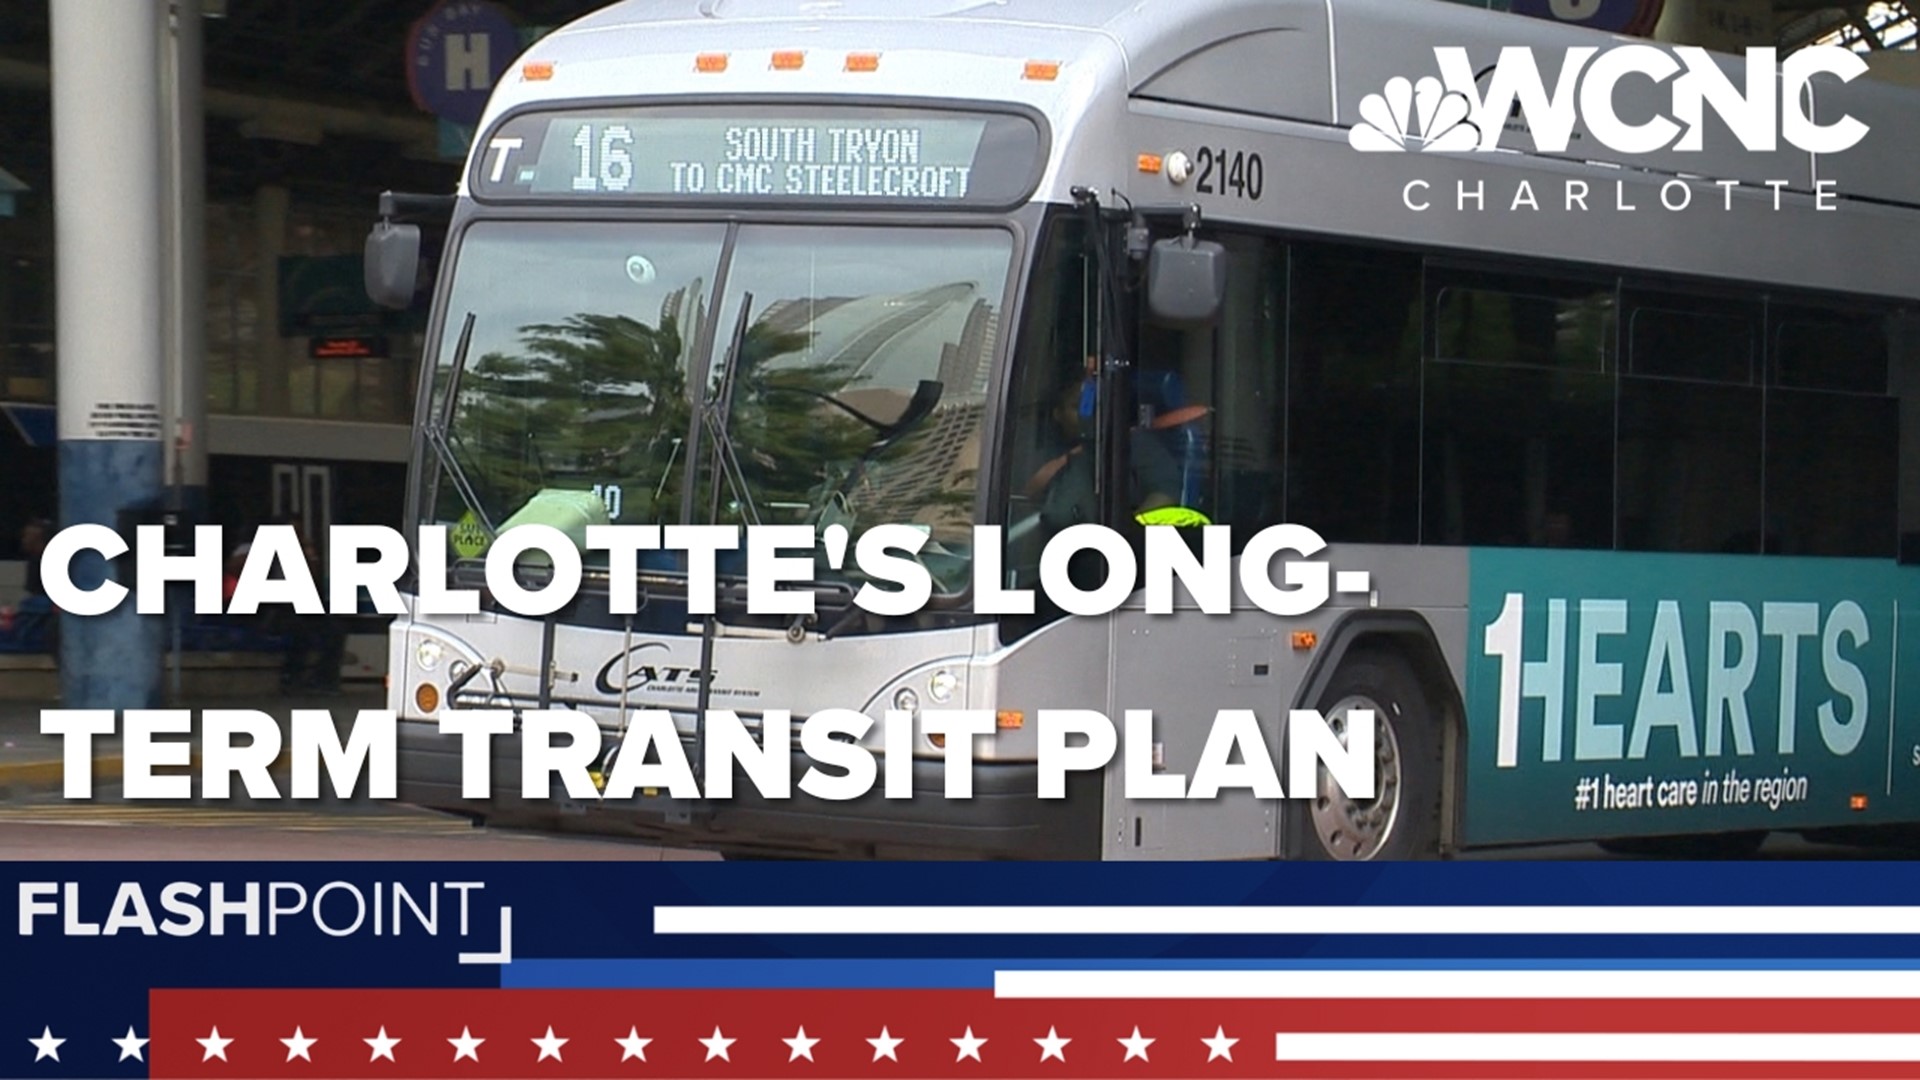 On Flashpoint, John Lewis talks about recent challenges at CATS and long-term transit plans.